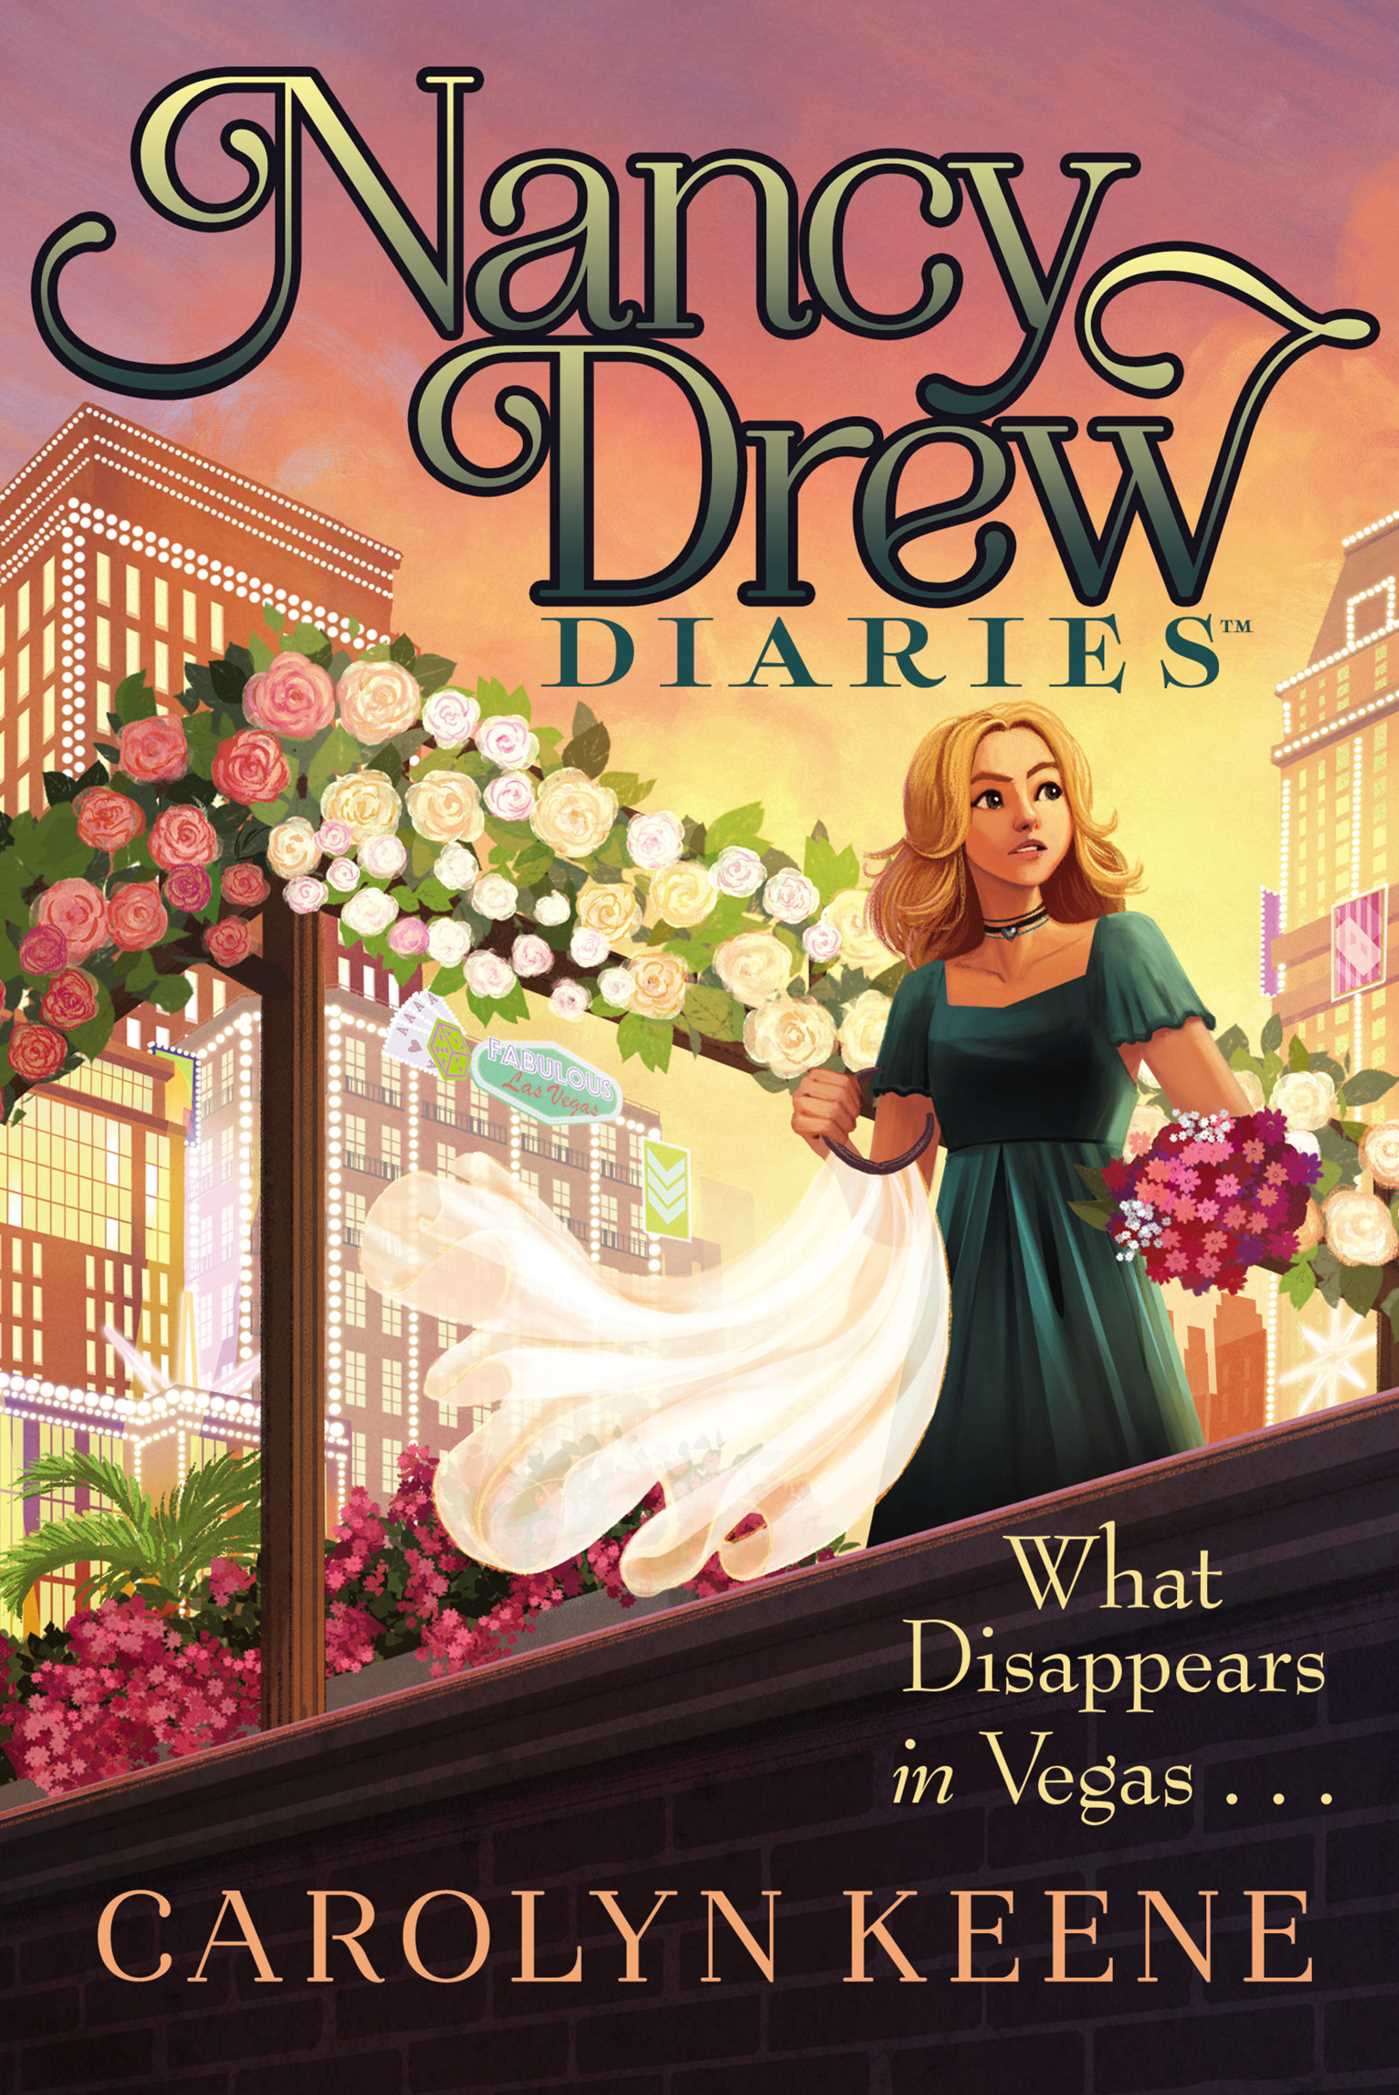 Nancy Drew Diaries #25 What Disappears in Vegas… ~ Cover Art, Synopsis, Details